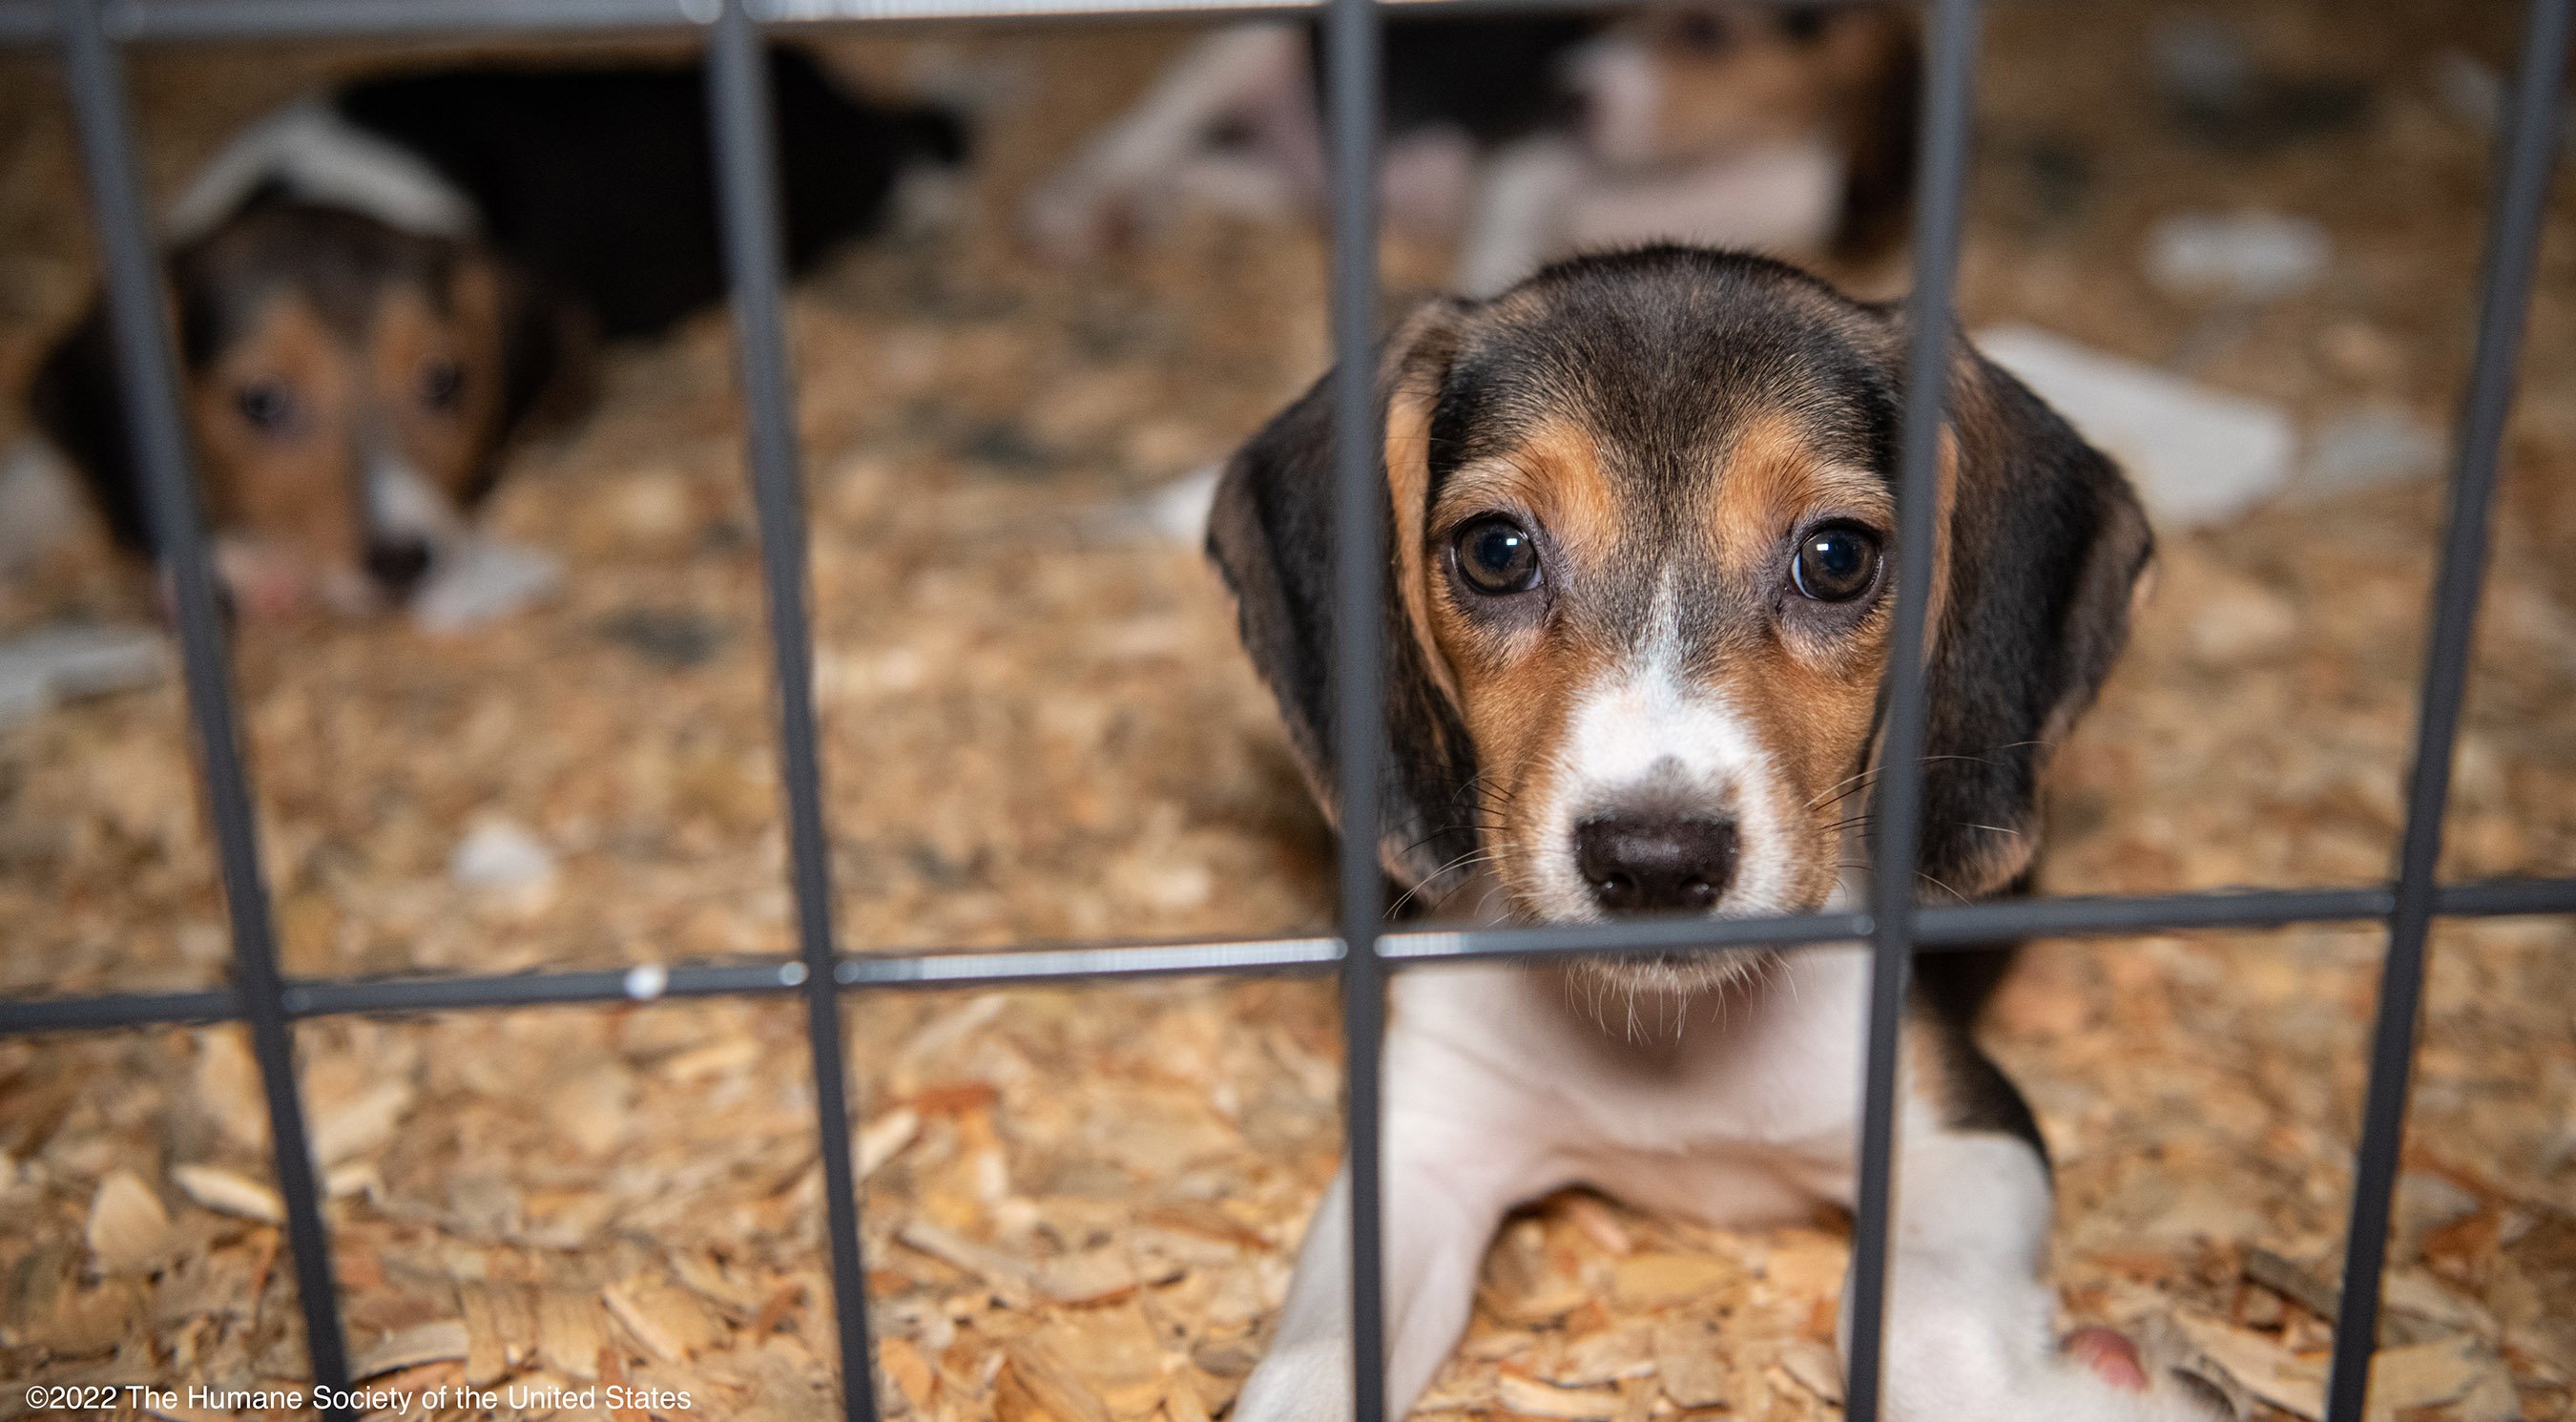 082022_Beagle Puppy Close Up in Kennel_©2022 The Humane Society of the United States-1